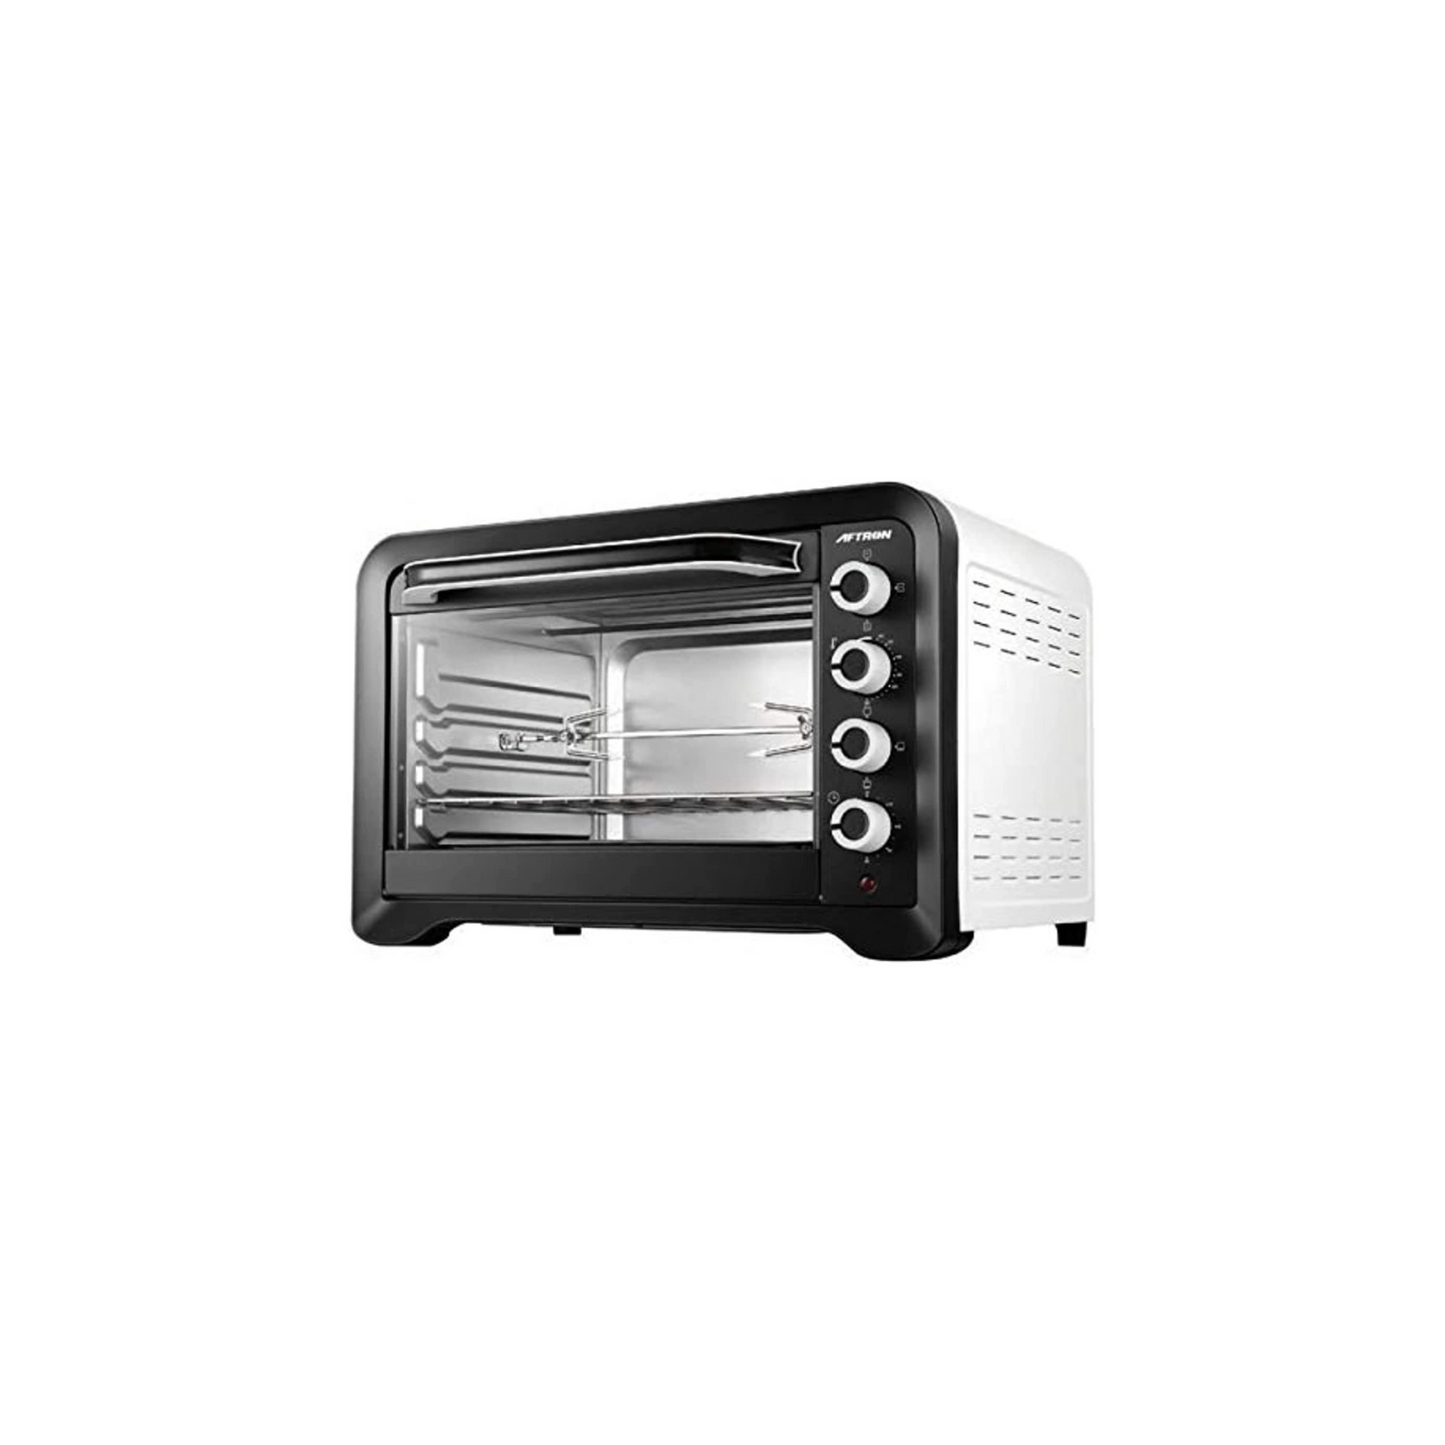 Aftron Toaster Oven with Grill, AFOT1200GRCK